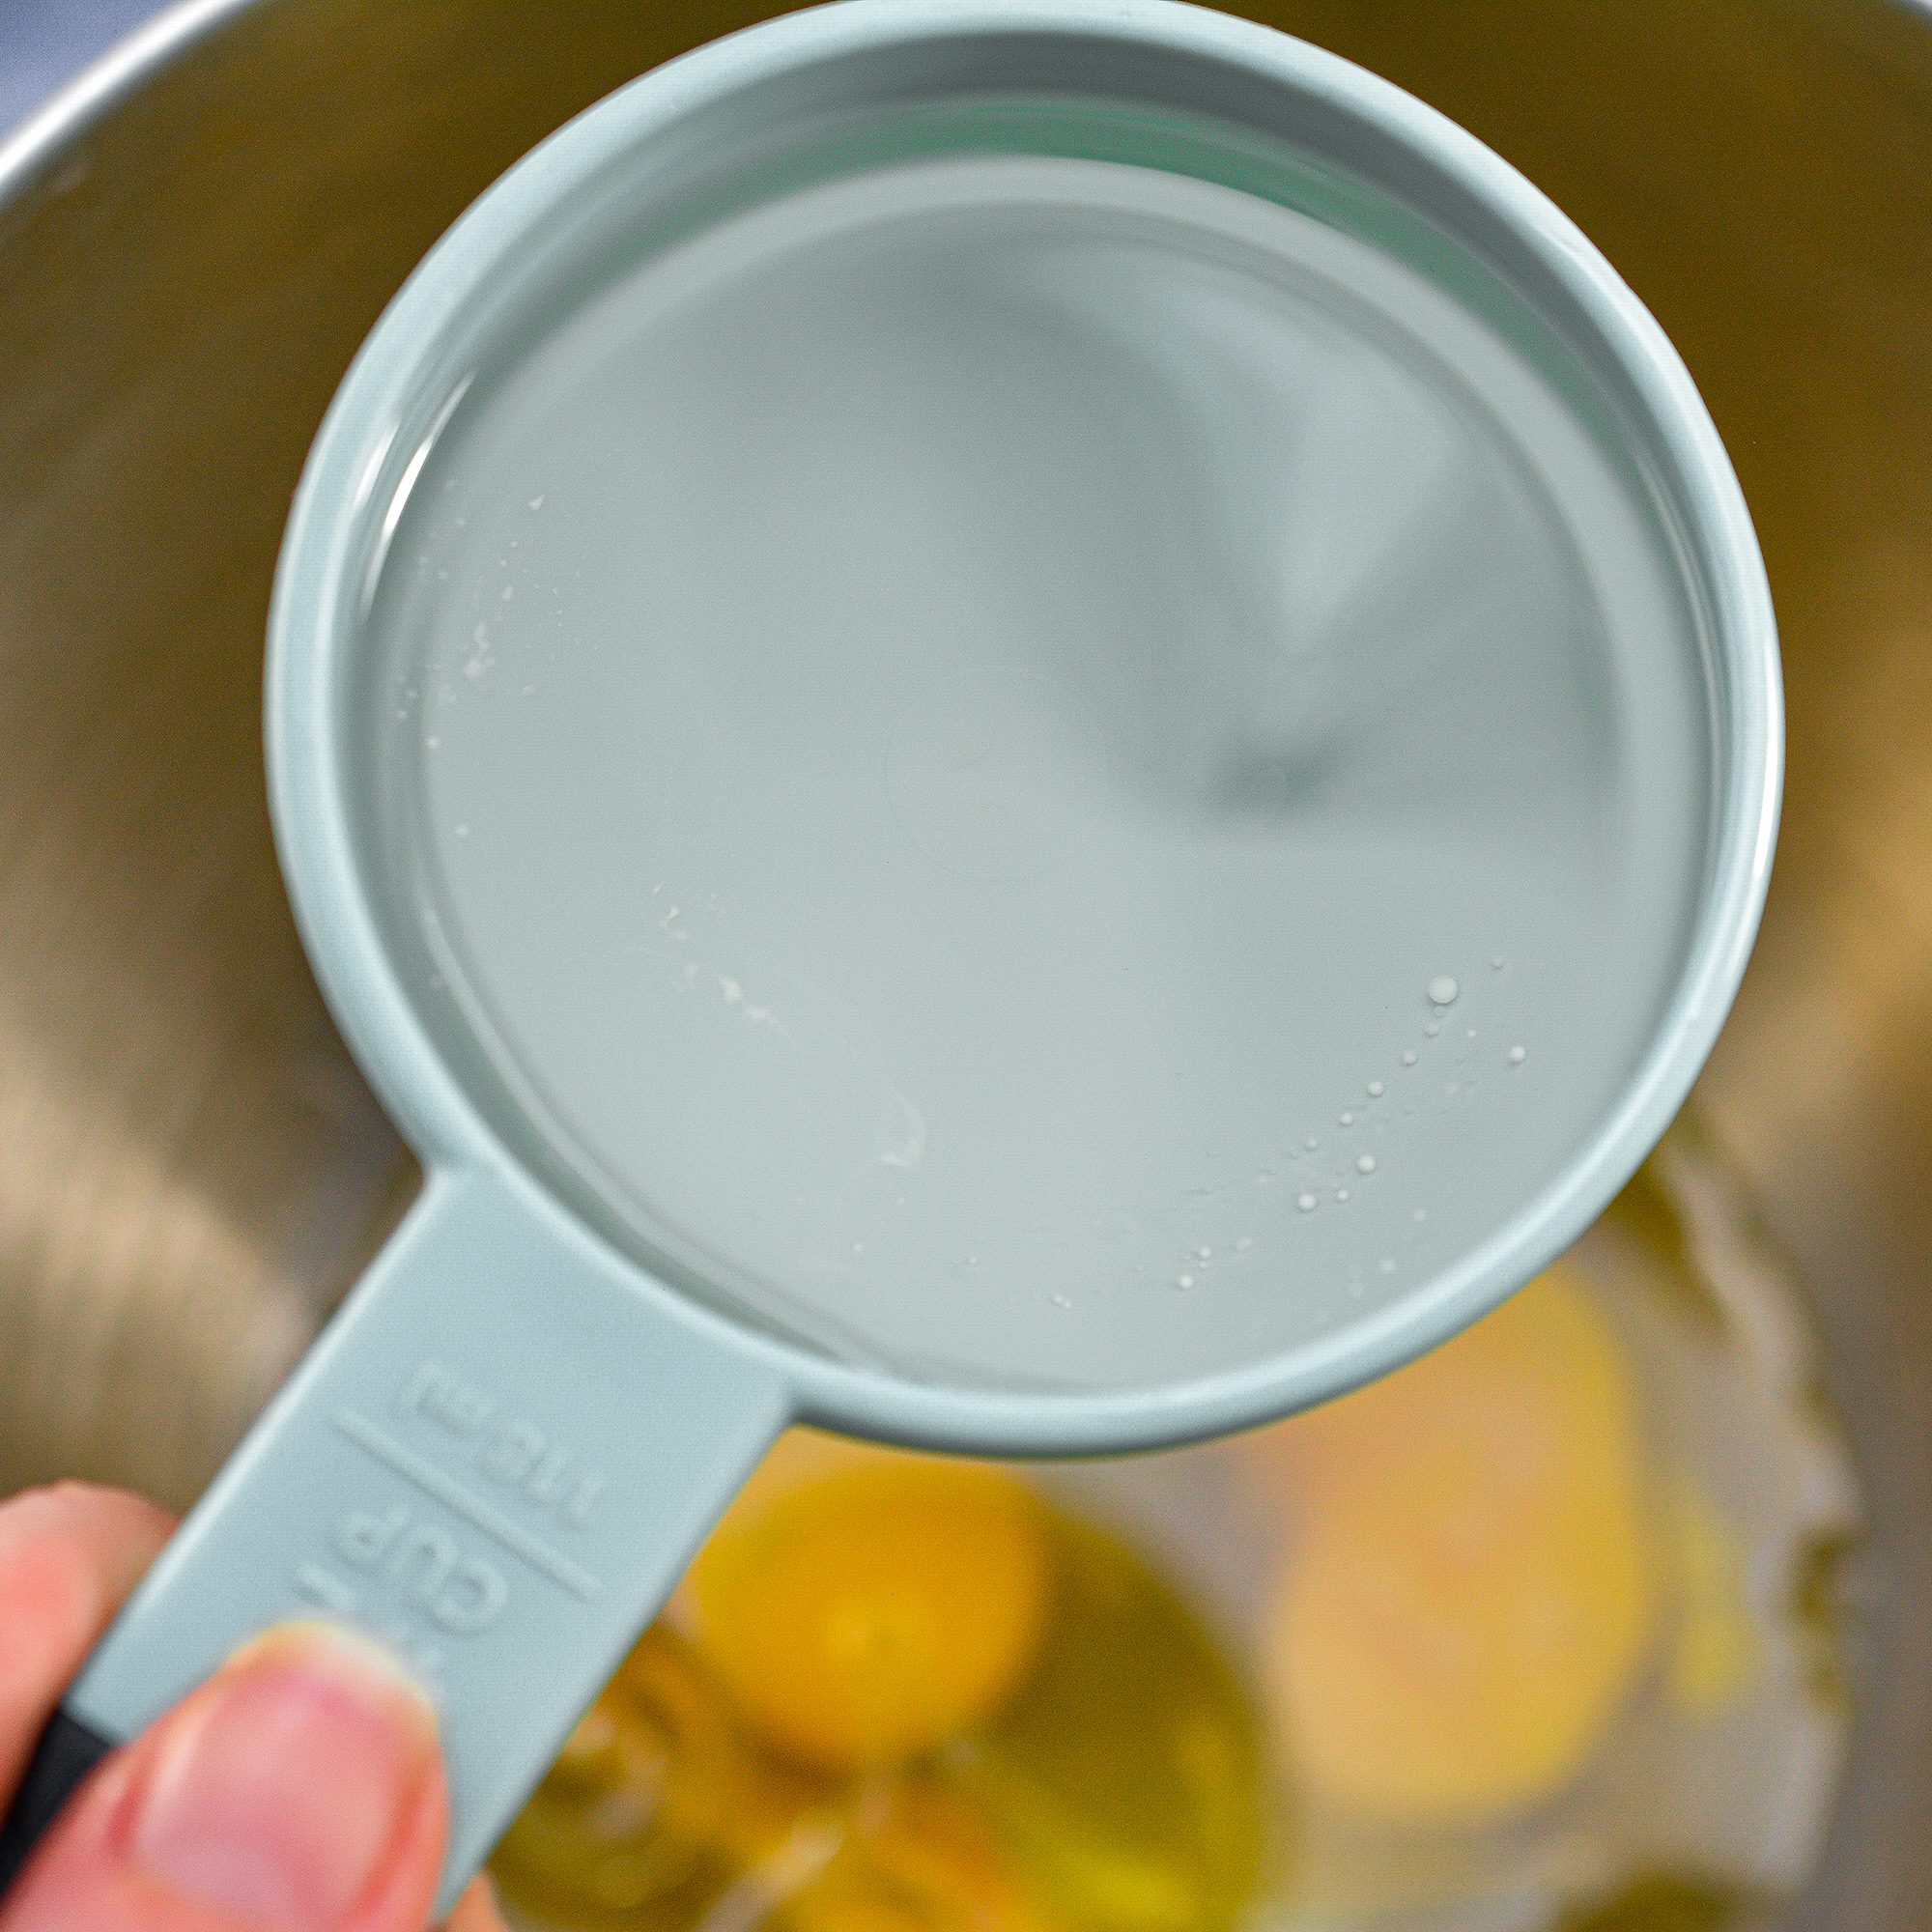 Mix together the oil, eggs, and sugar for the cake until well blended, then stir in the vanilla extract.